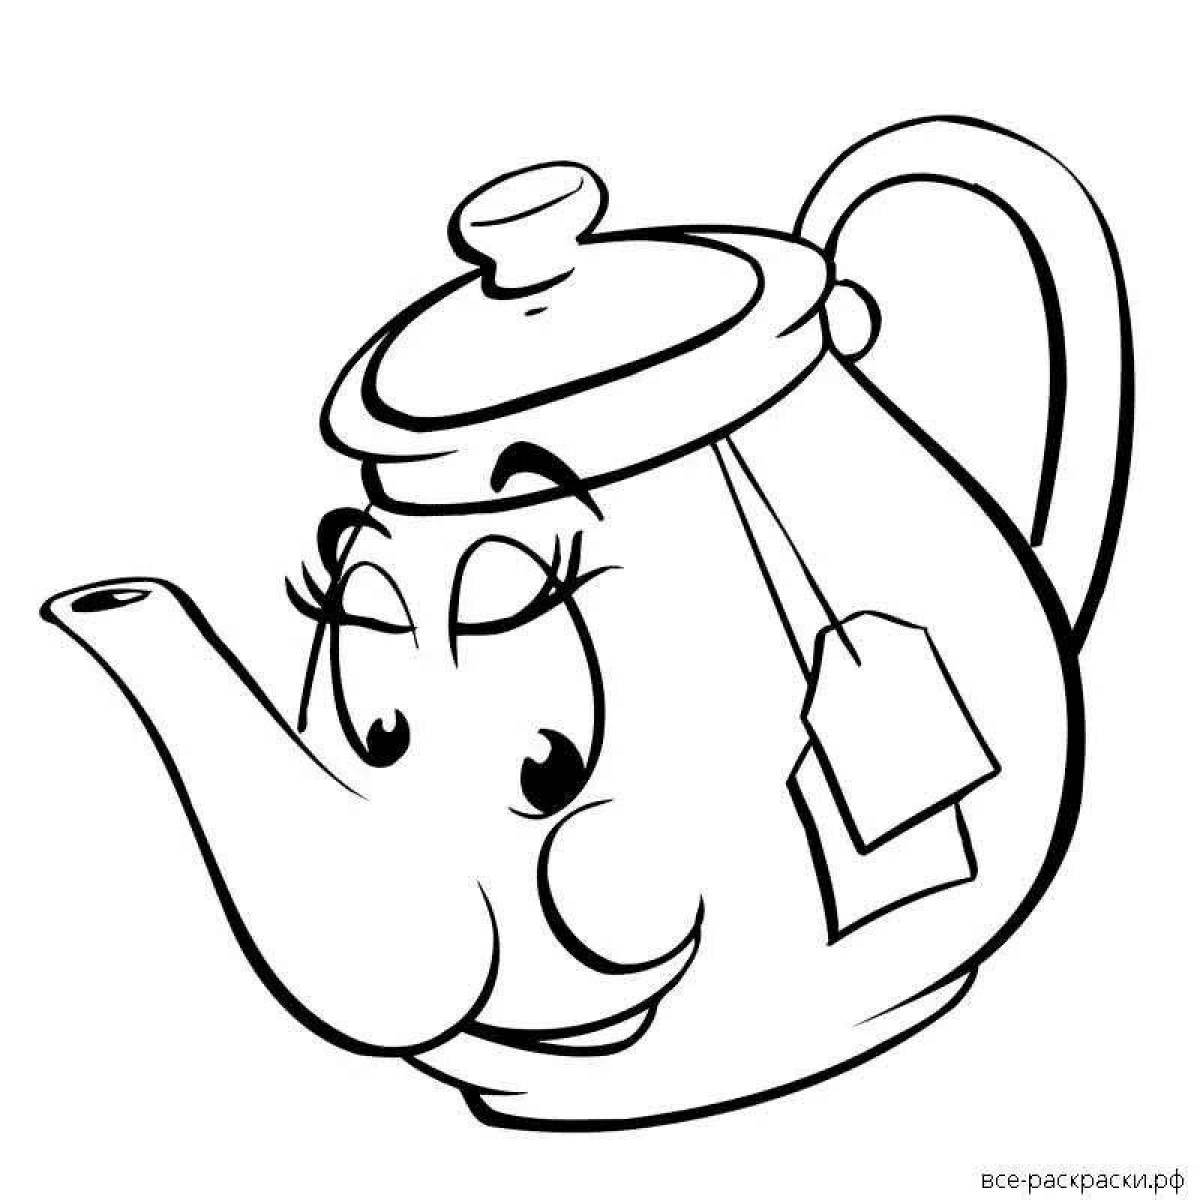 Funny teapot coloring book for kids